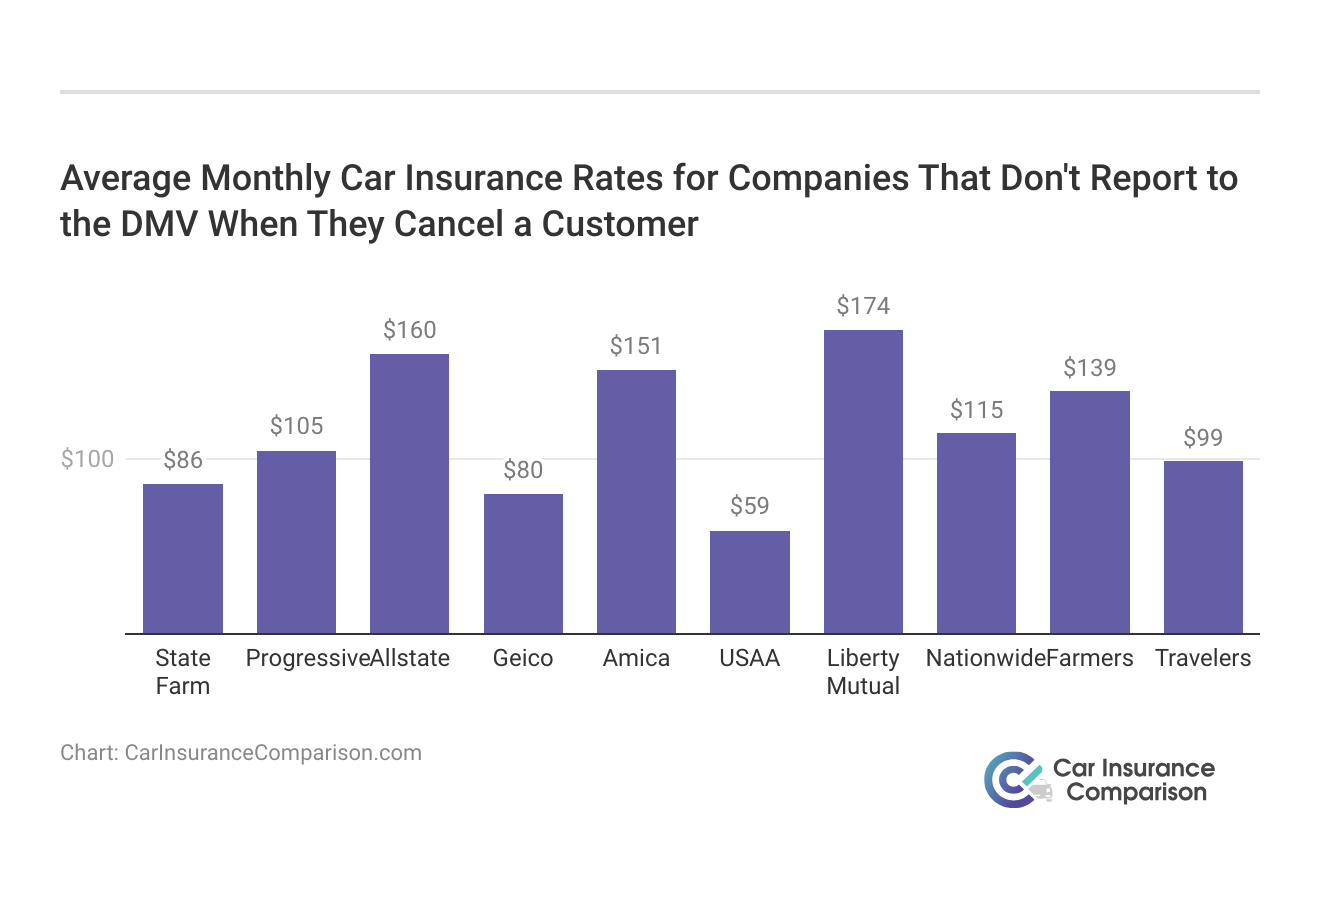 <h3>Average Monthly Car Insurance Rates for Companies That Don't Report to the DMV When They Cancel a Customer</h3>